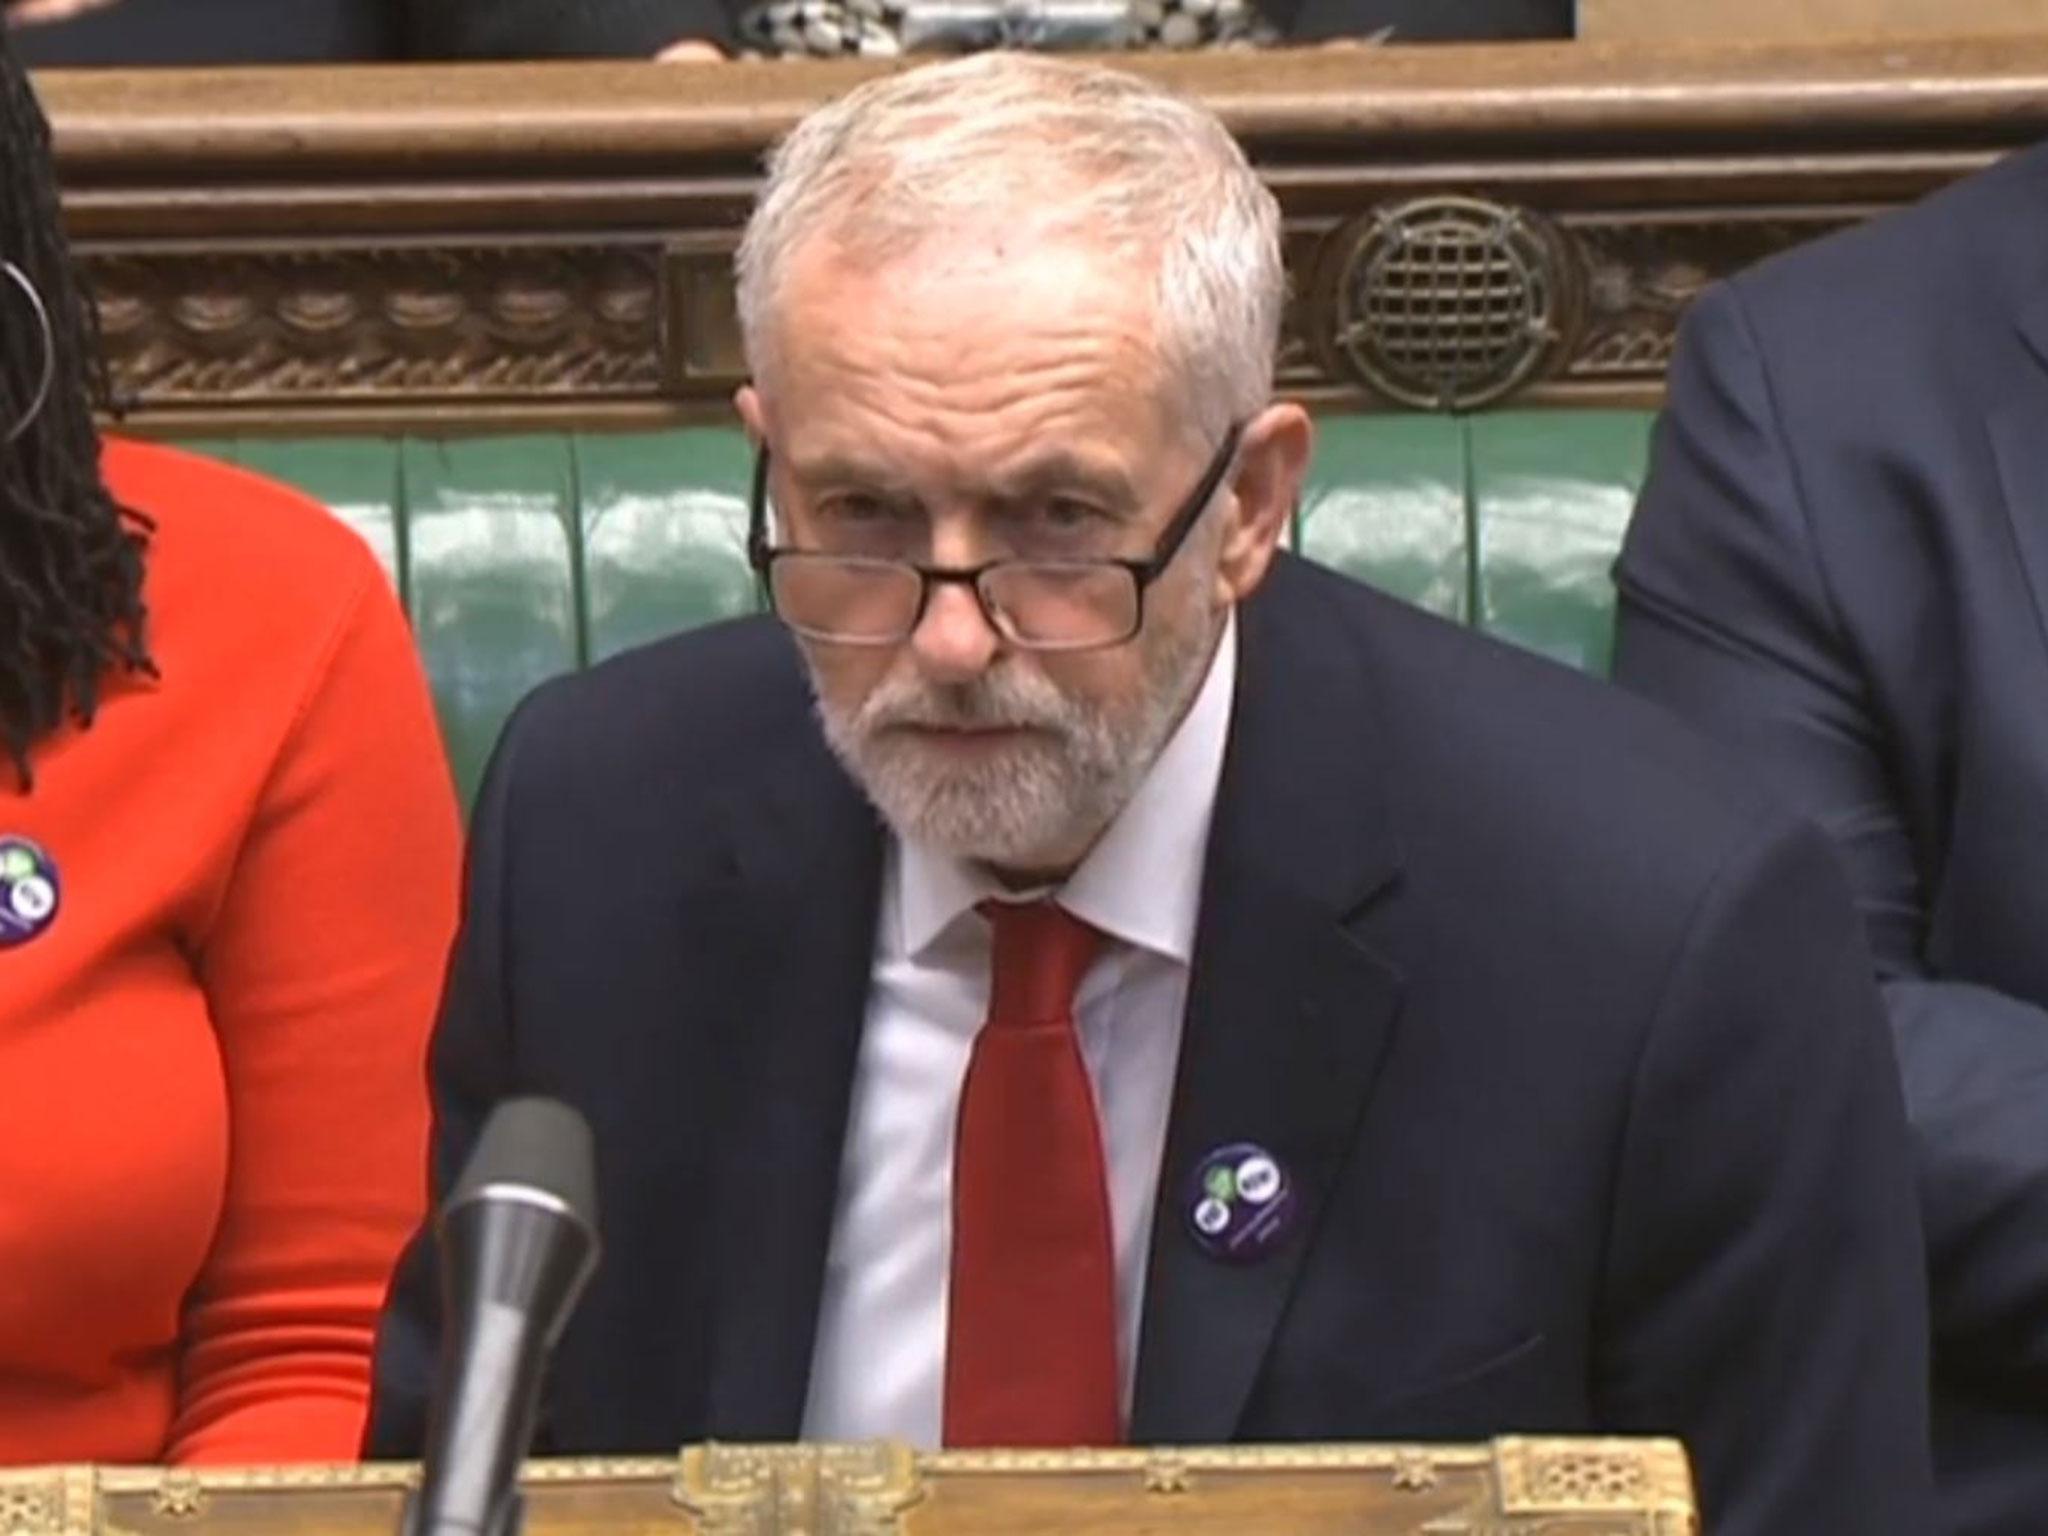 Jeremy Corbyn has called for the Government to stop selling arms to Saudi Arabia, arguing they are being used in Yemen’s civil war